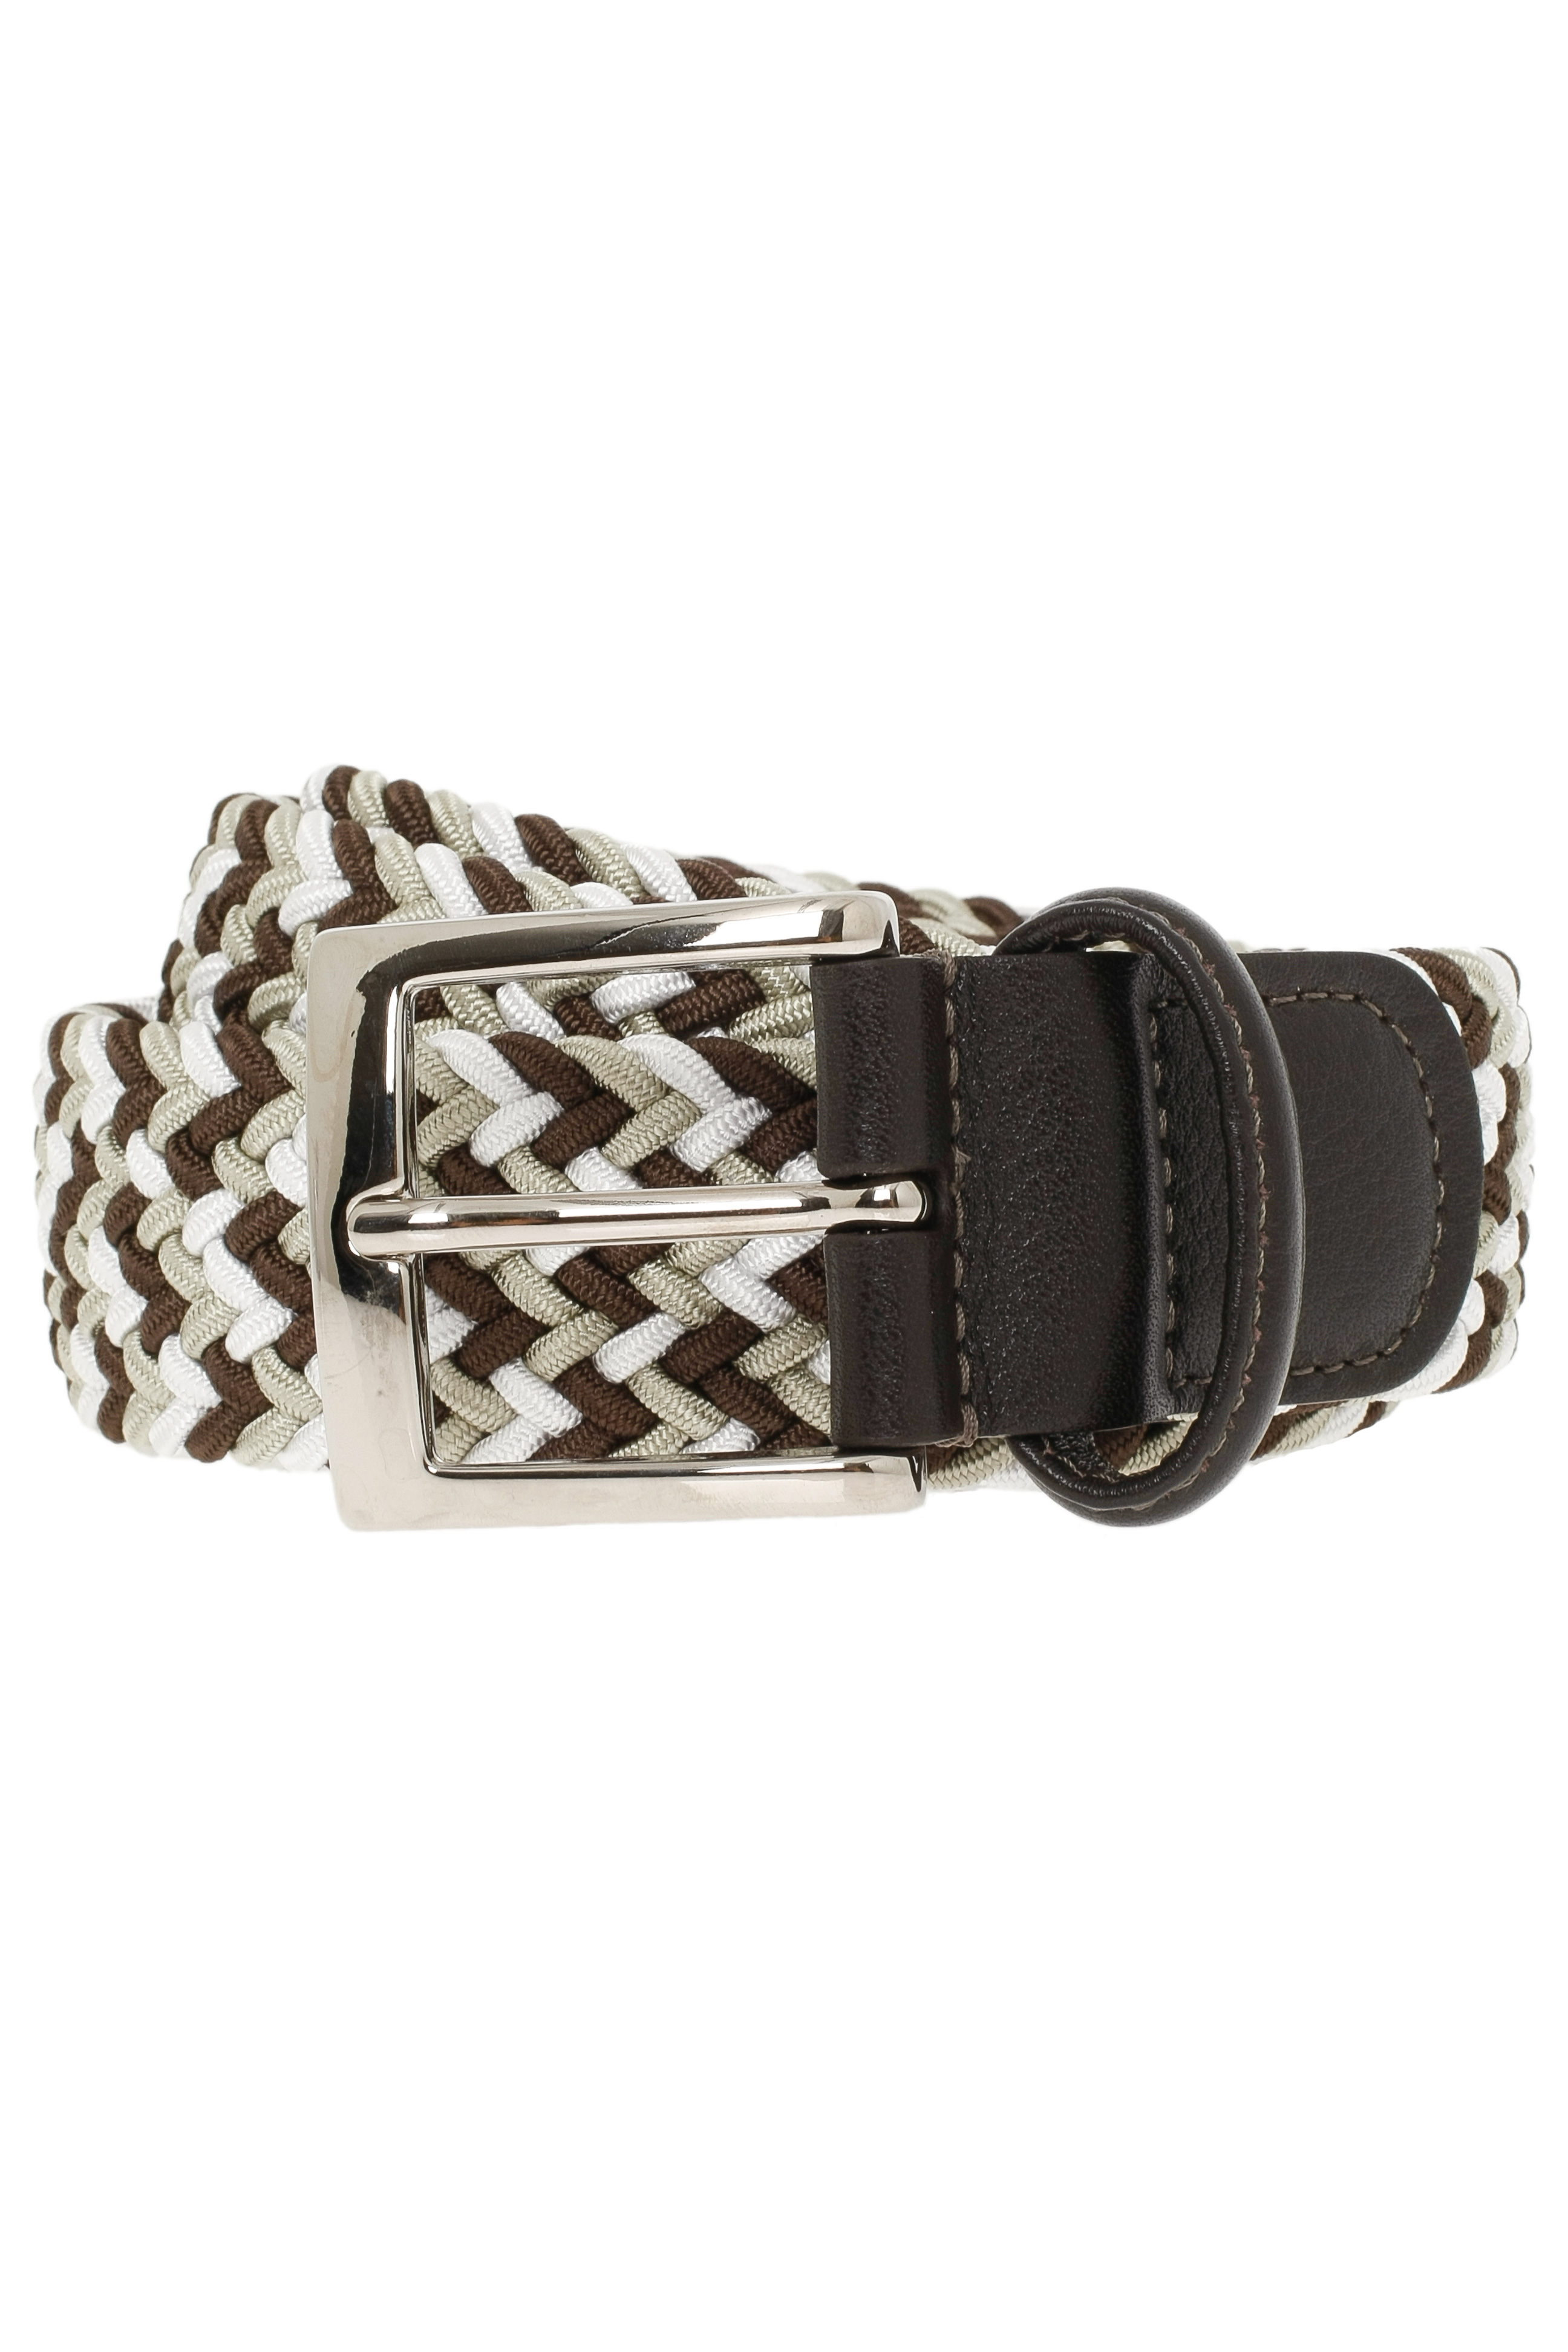 Lyst - Andersons Stretch Woven Multi Col Belt in Black for Men